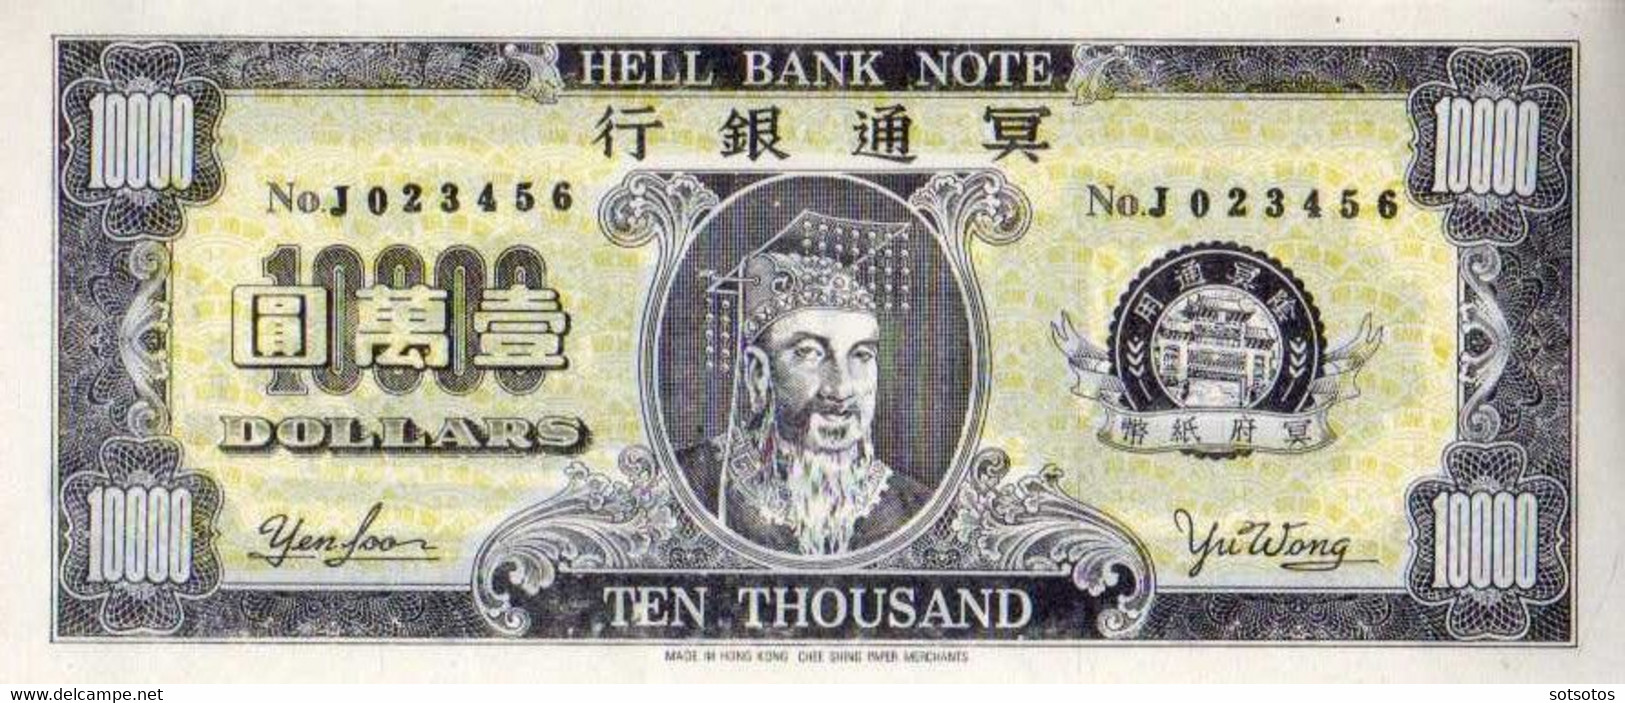 Collection of 12 different Chinese ‘Hell Notes” – printed face and back as colorful imitation currency used, then burned